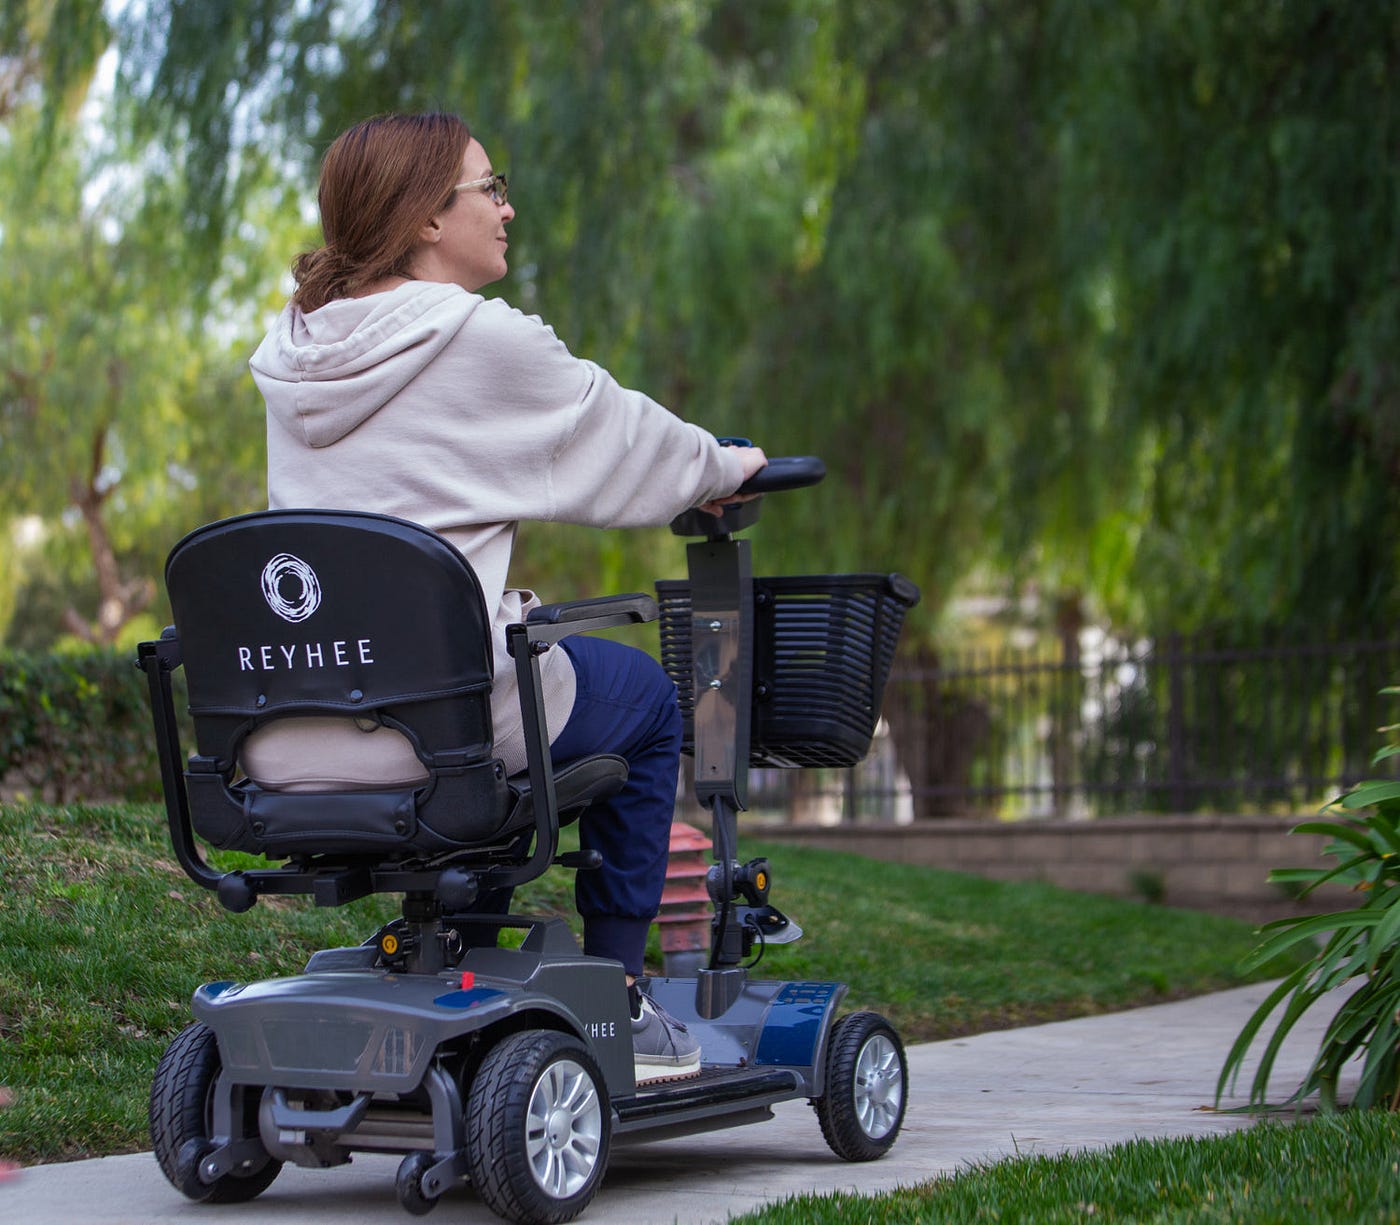 Reyhee Introduces Long-Lasting Mobility Solutions for Senior Citizens and  the Disabled | by Jeffrey Clos | CodeX | Medium